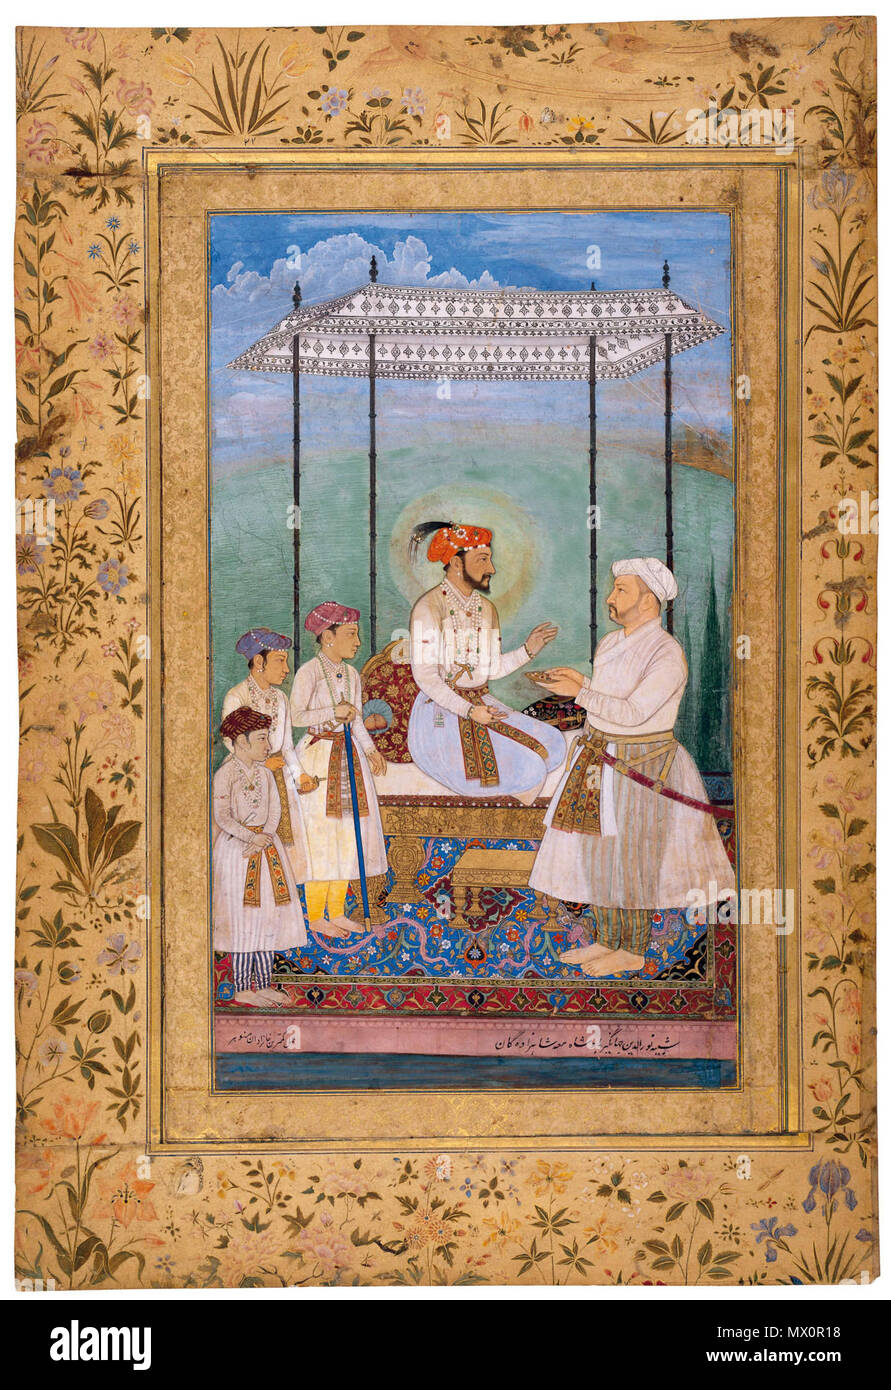 . English: The emperor sits in haloed profile upon a gold-footed throne under a high white canopy, flanked by his three young princes who stand on the left. All are resplendent with opulently bejewelled turbans, necklaces, qatar daggers, and sashes (patkas) against a rounded backdrop of turquoise, perhaps suggesting a globe, as golden light appears on the right. The inscription on this Mughal painting identifies it as a portrait of emperor Jahangir and his three sons, but what we see today are the faces of Shah Jahan (r. 1628-57 CE) and his three eldest sons - Dara Shikoh (1615-59 CE), Shah Sh Stock Photo